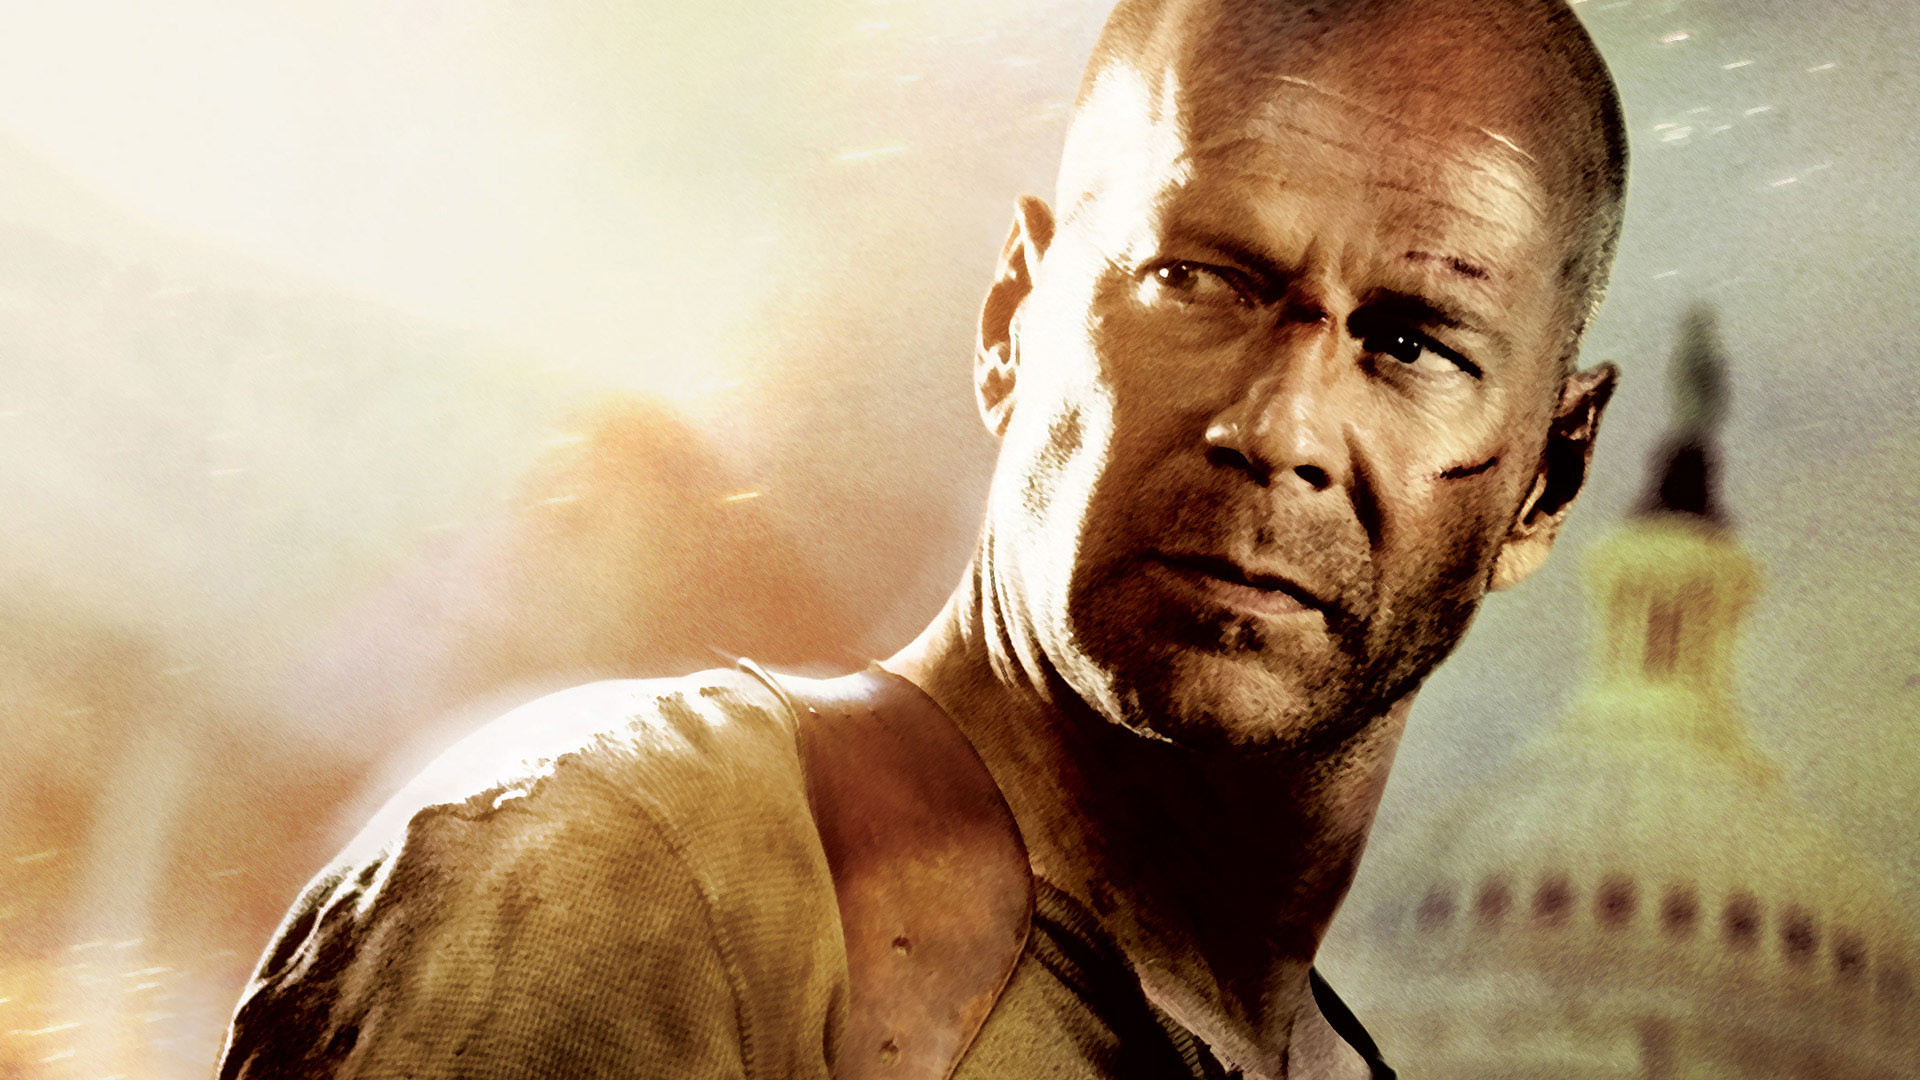 Bruce Willis Wallpapers 64 images